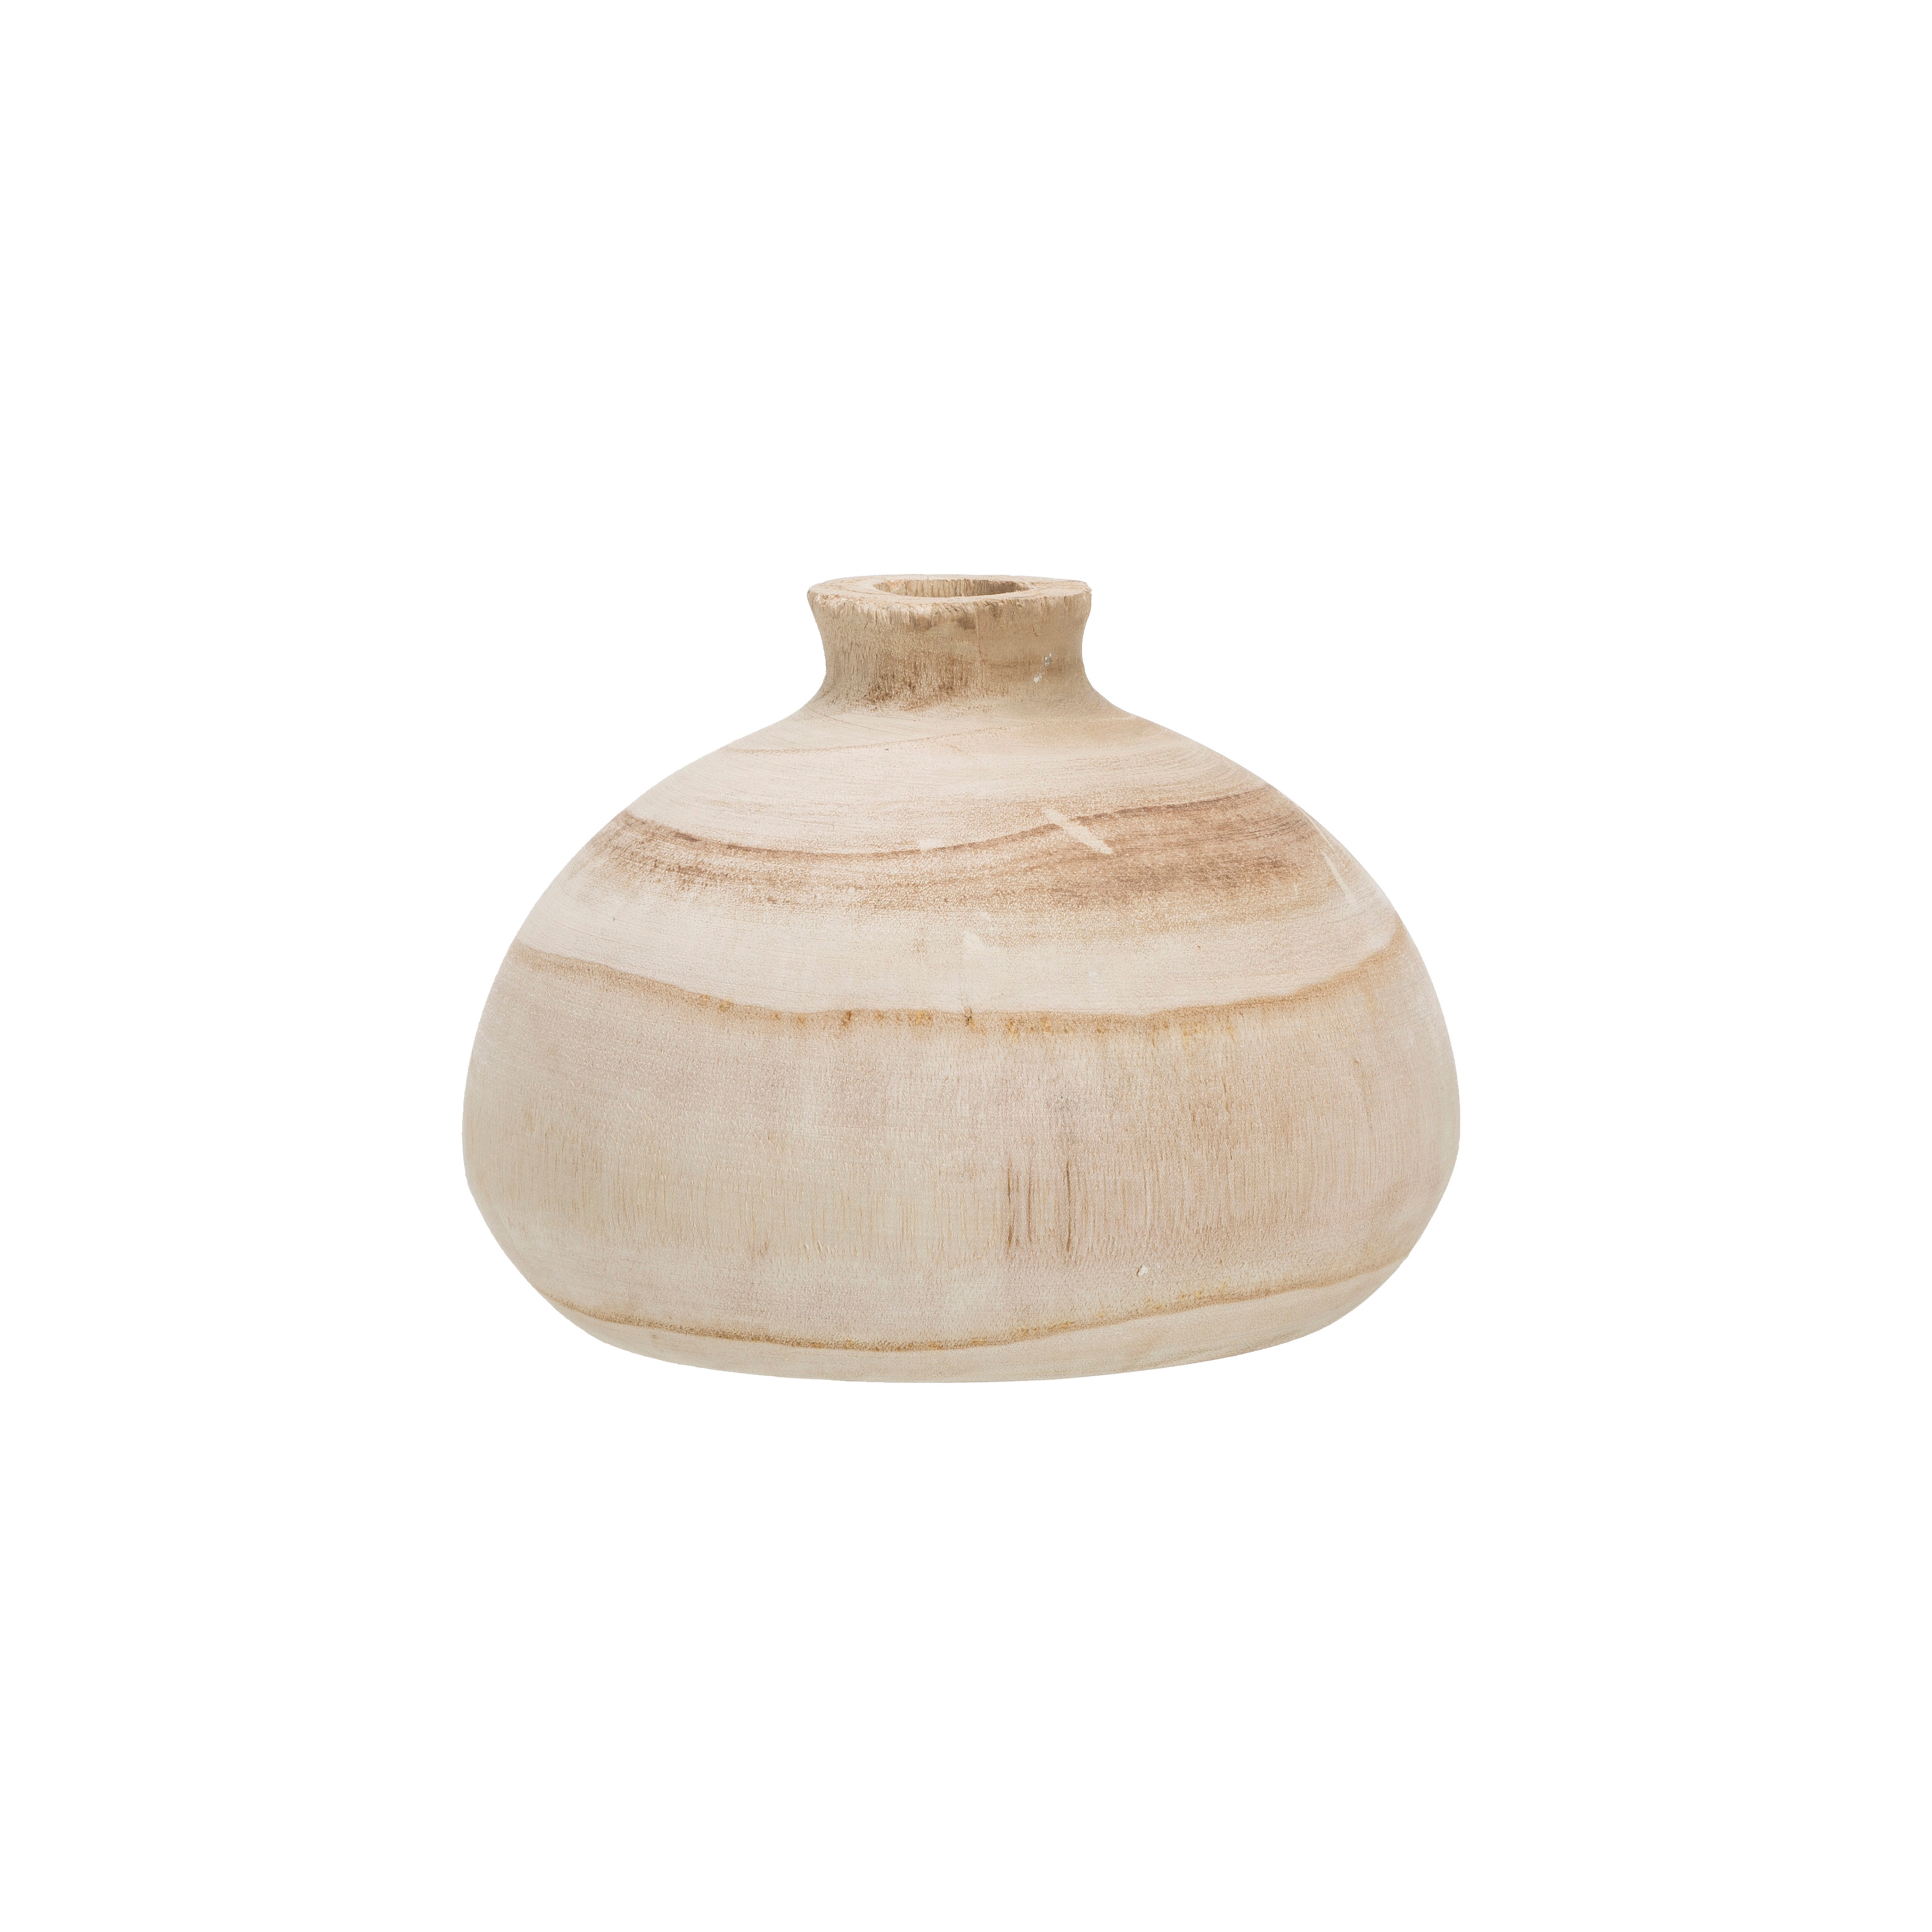 Small Paulownia Wood Vase (Each one will vary) - Nomad Home